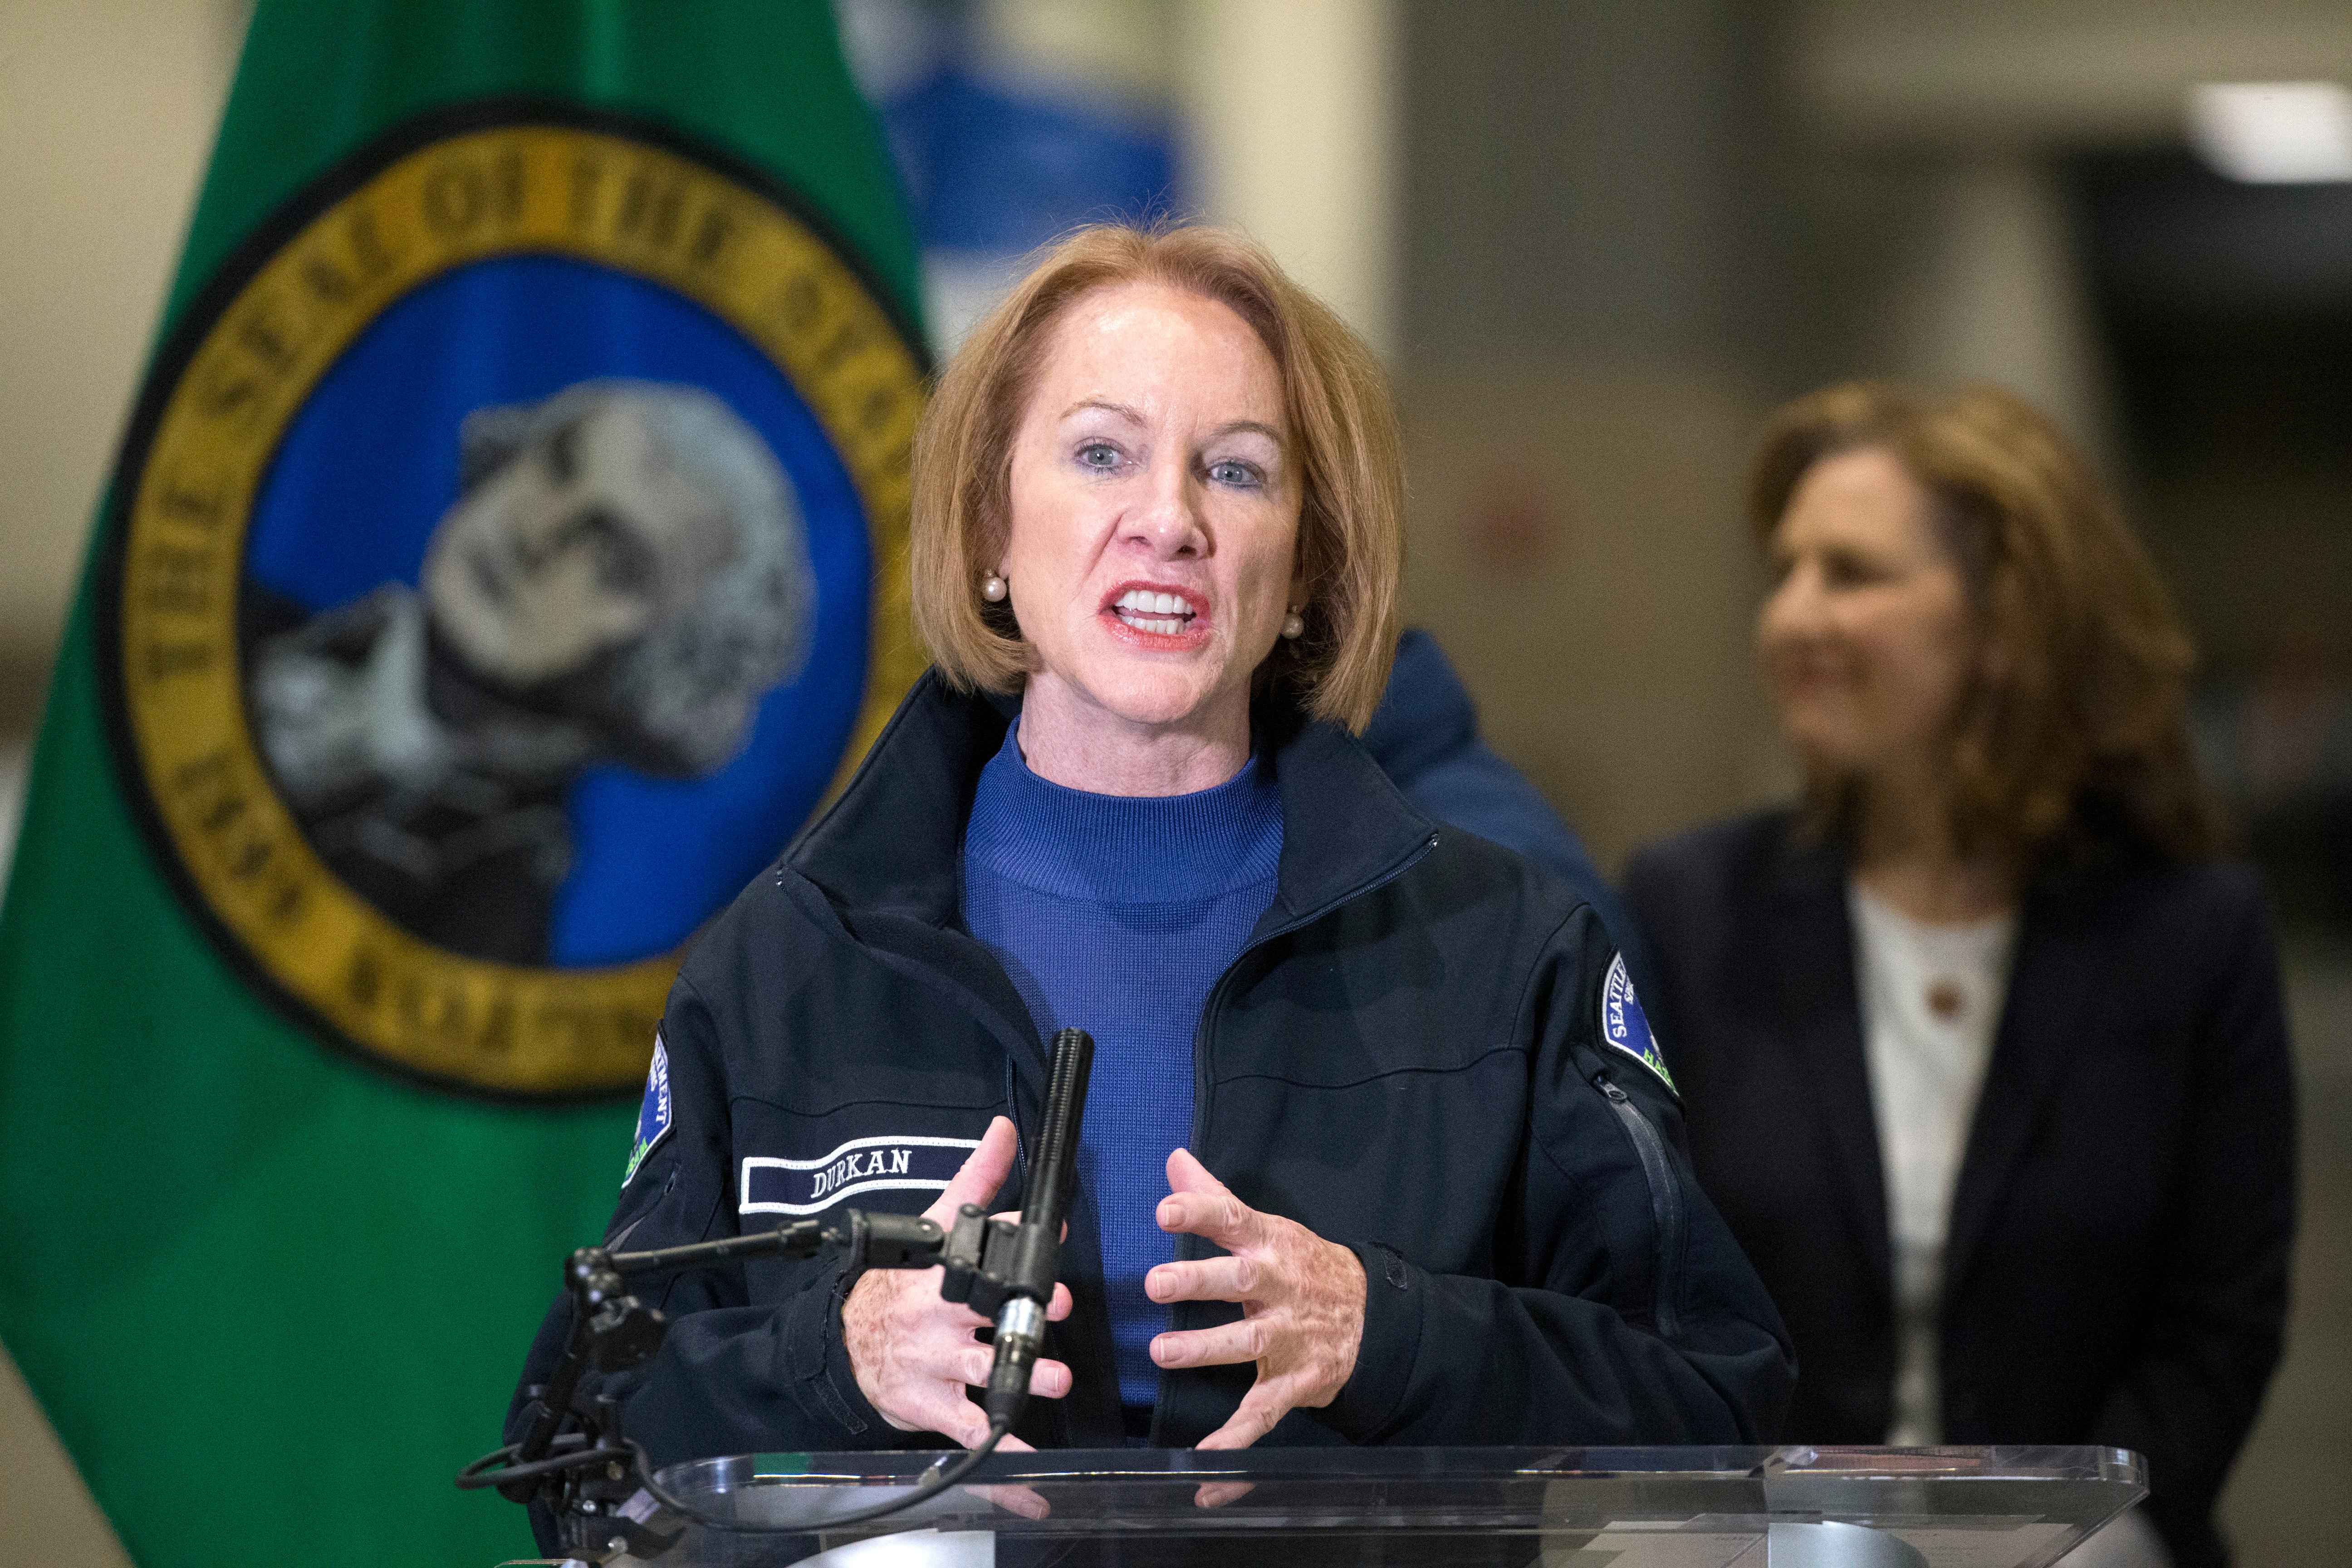 SEATTLE, WA - MARCH 28: Mayor Jenny Durkan at Army Field Hospital In Seattle (Photo by Karen Ducey/Getty Images)